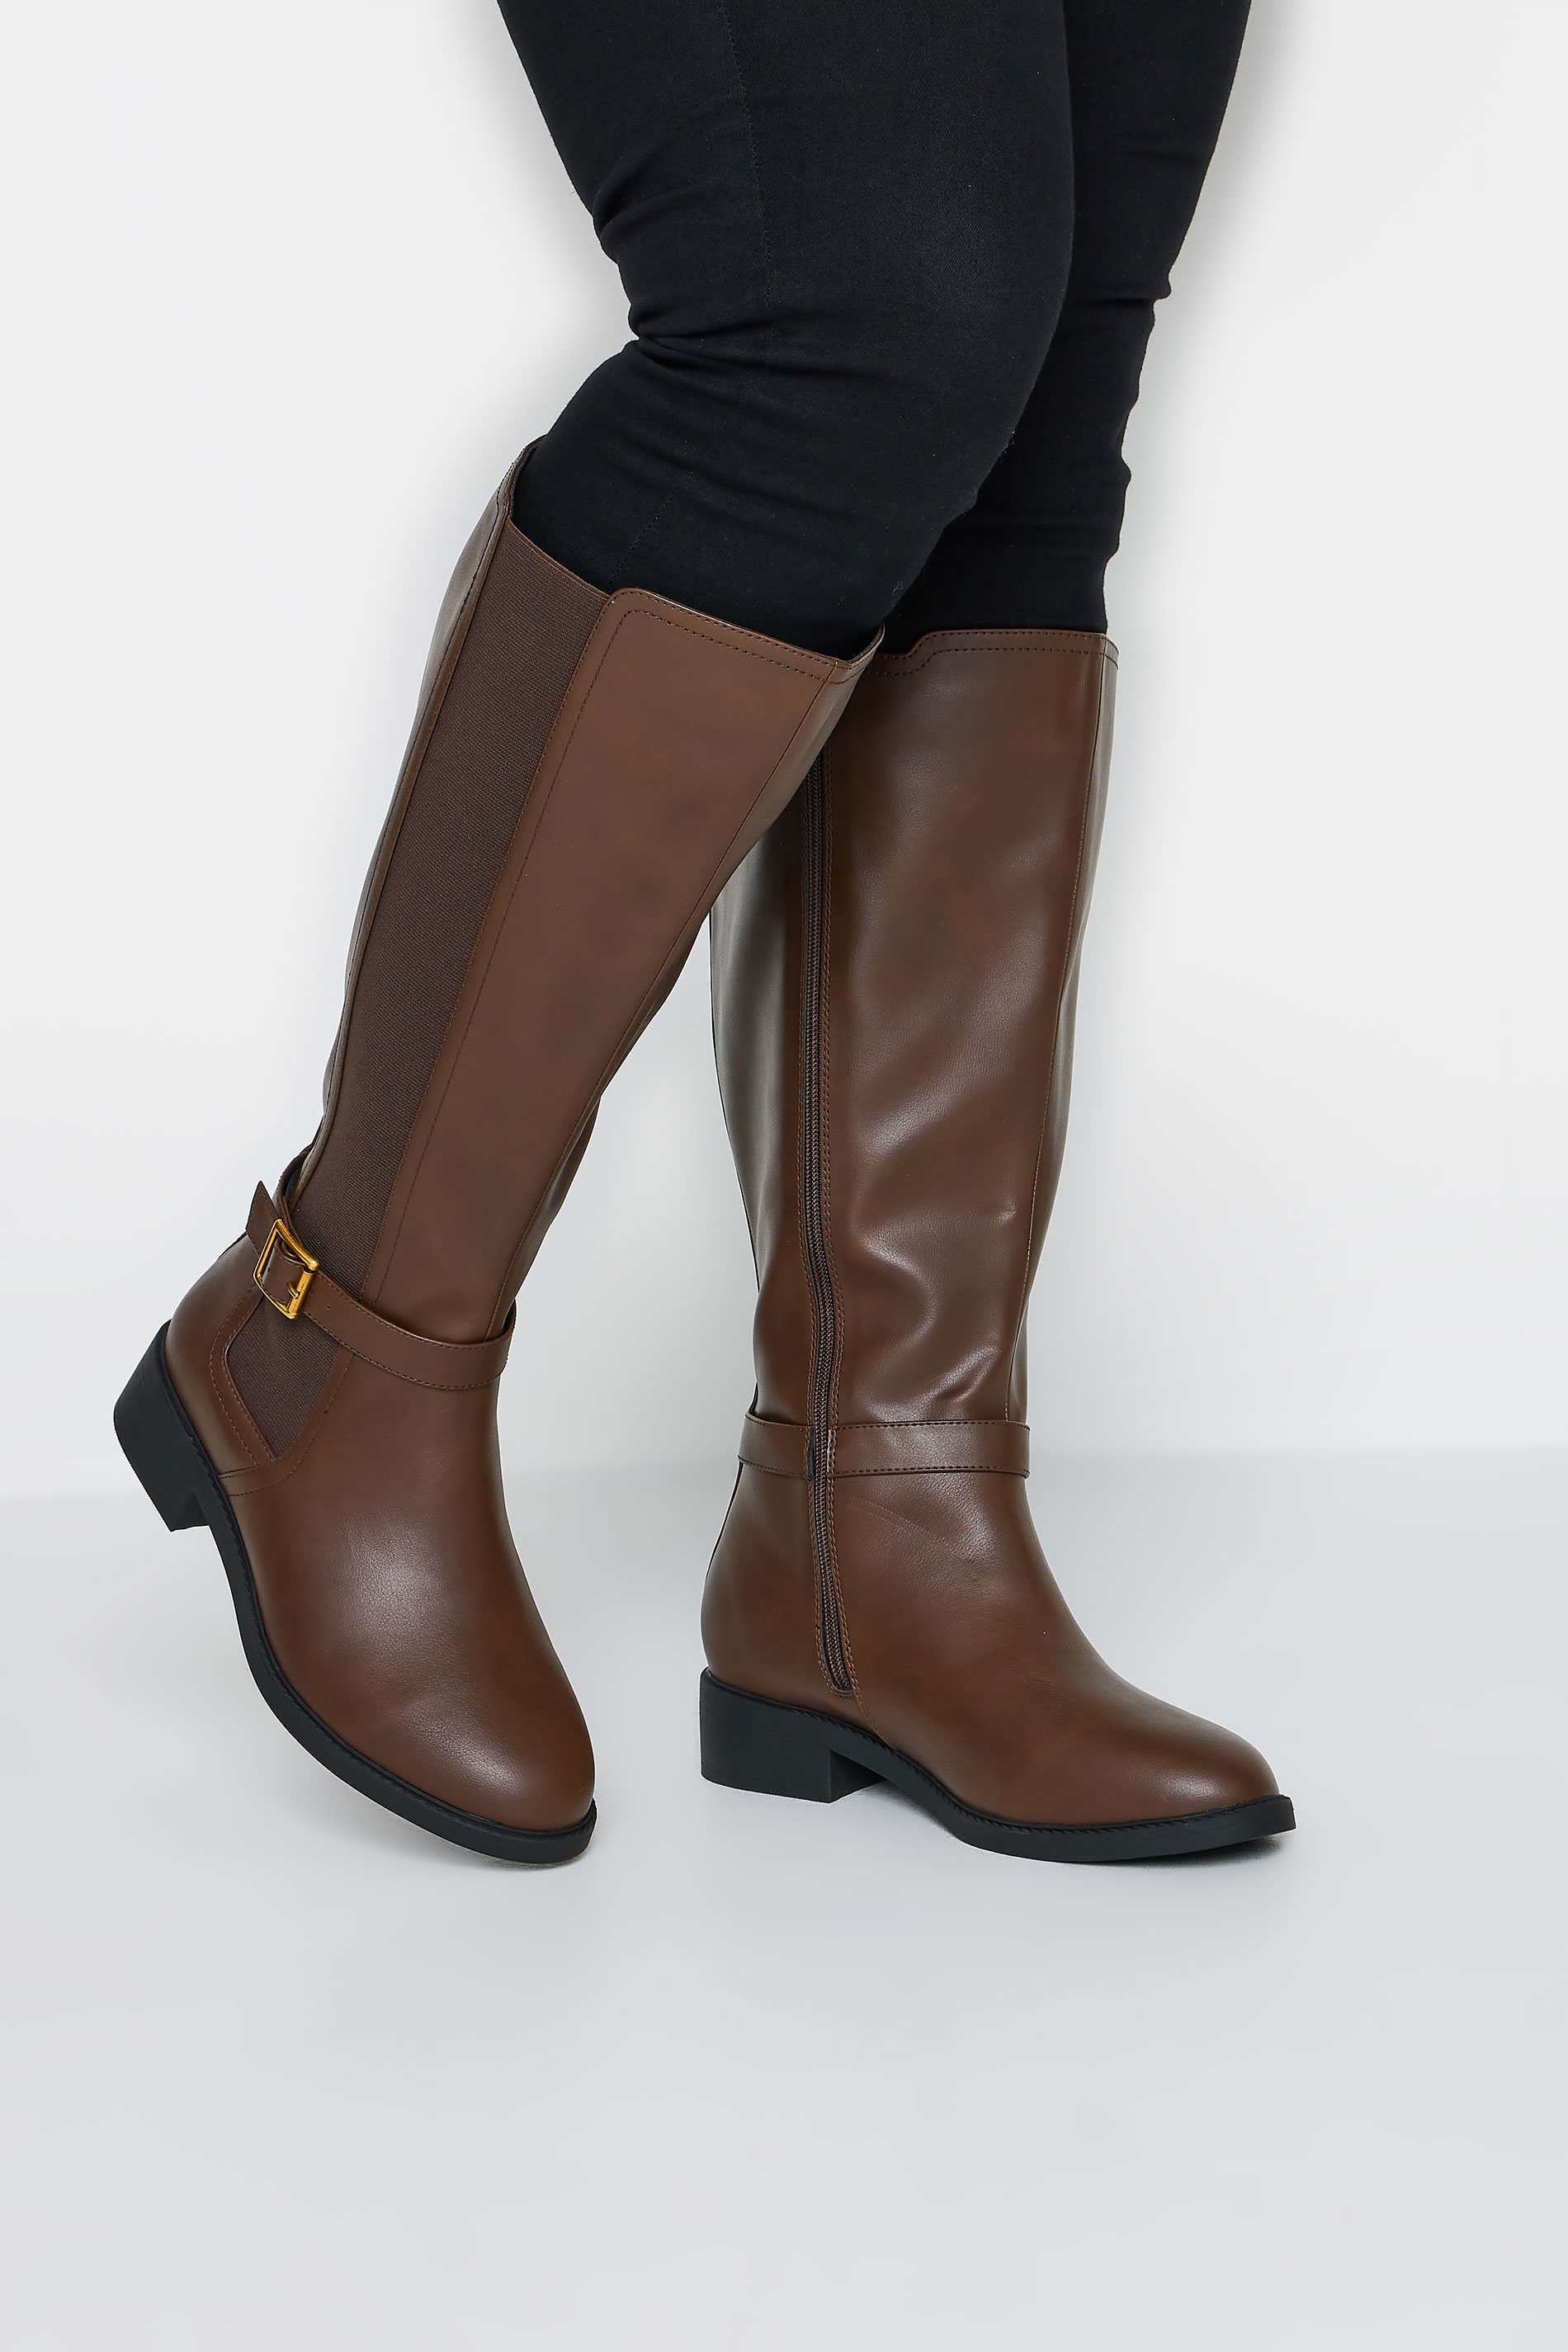 LIMITED COLLECTION Brown Strap Knee High Boot In Extra Wide EEE Fit | Yours Clothing 1